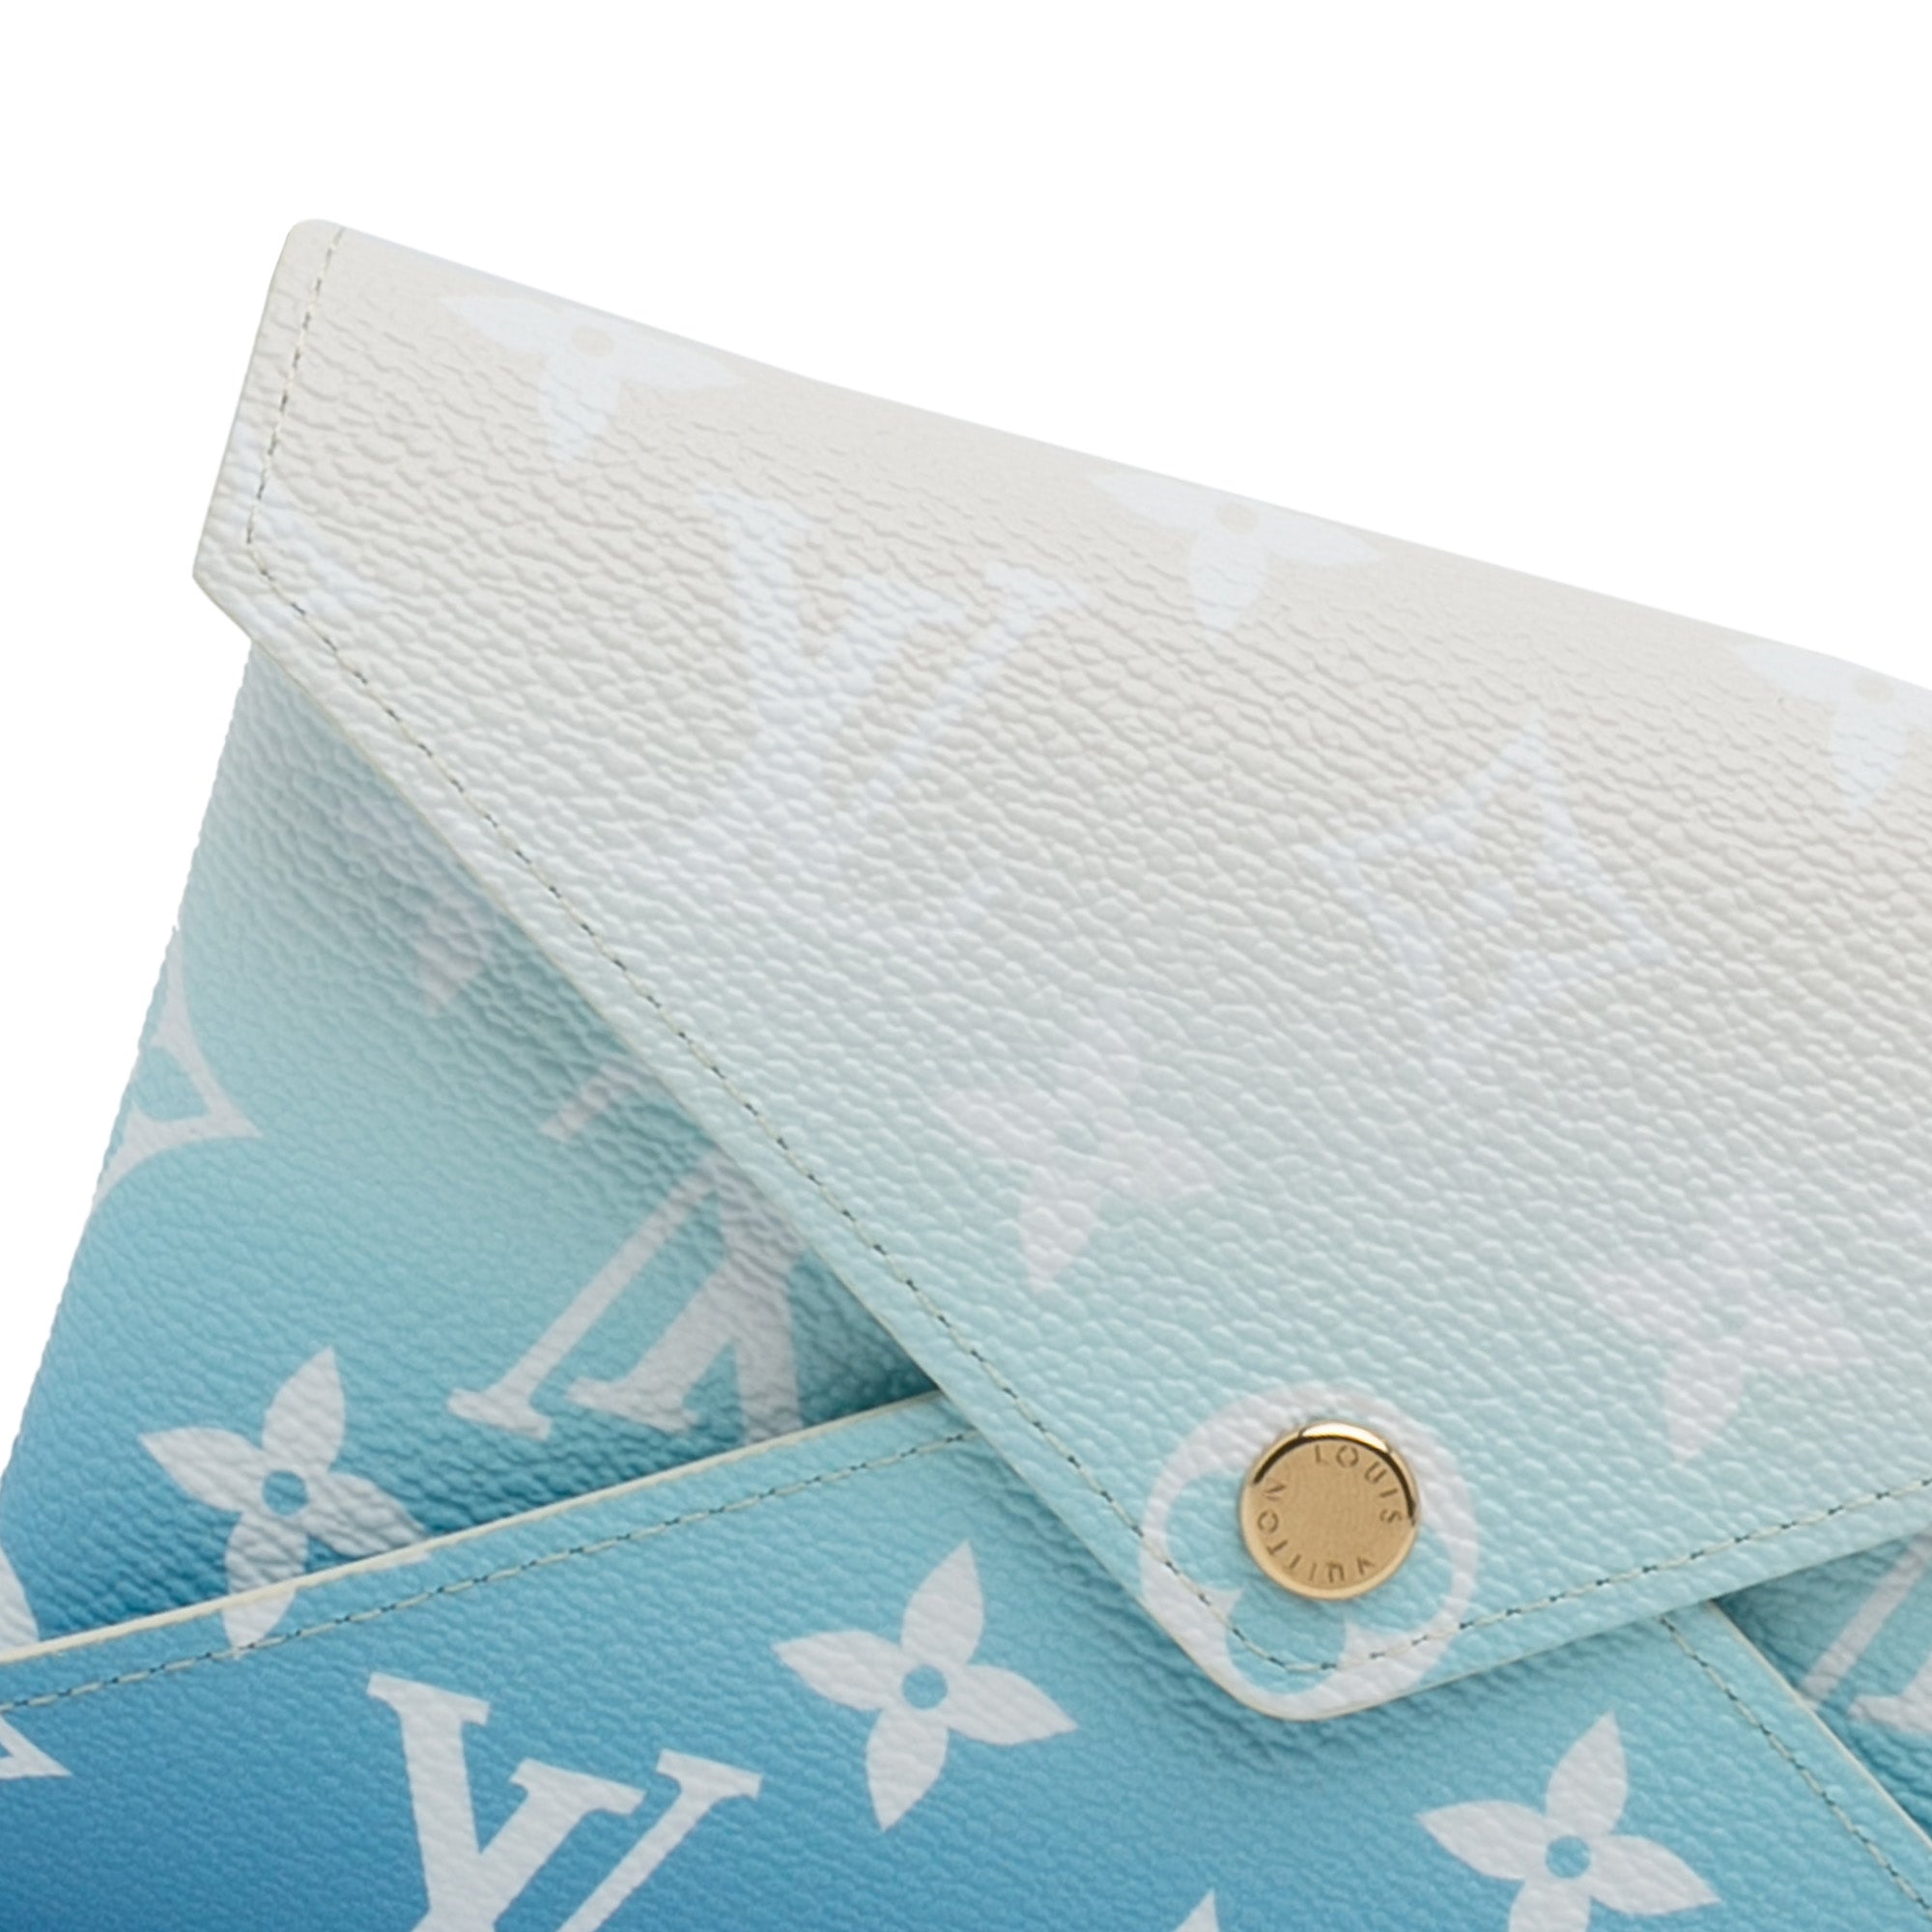 NWOT Louis Vuitton LV Kirigami Pouch By the Pool Medium Insert & Chain  Blue